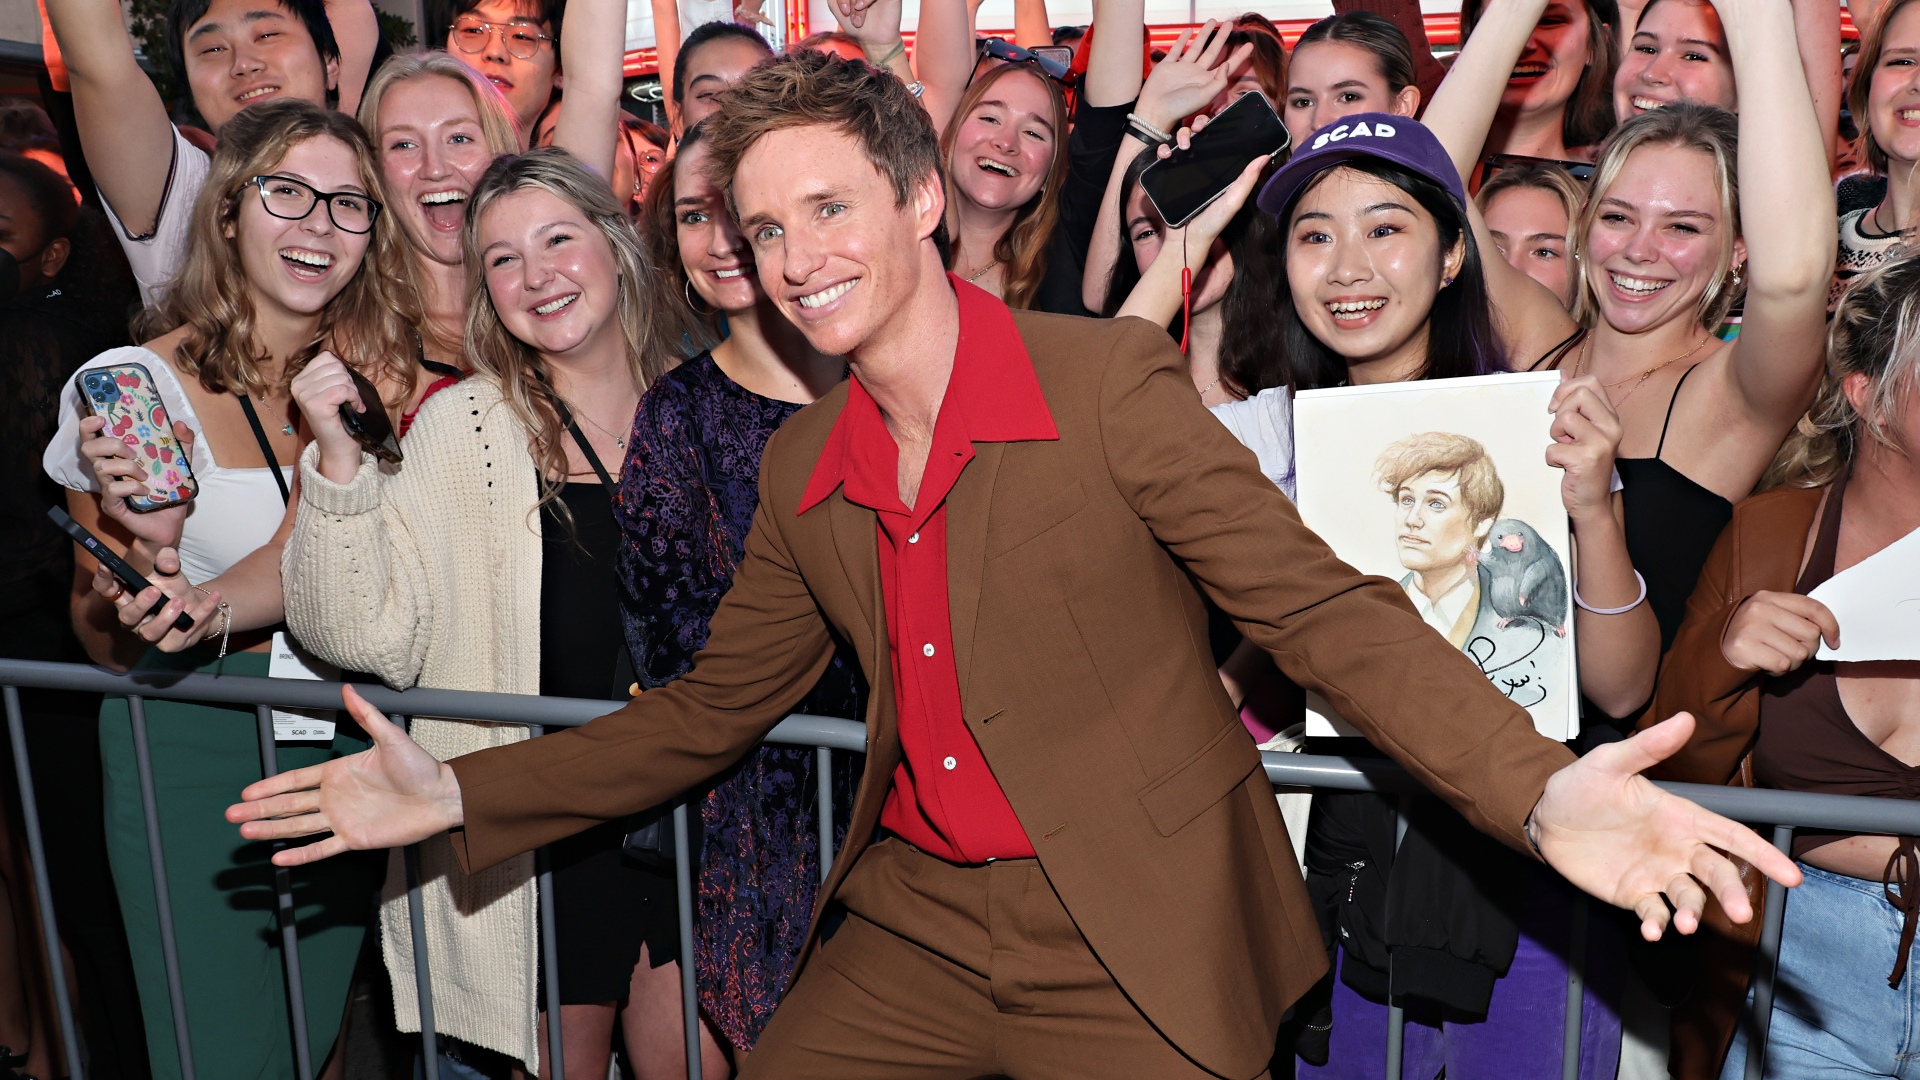 Eddie Redmayne poses with fans during the 25th SCAD Savannah FIlm Festival on October 23.